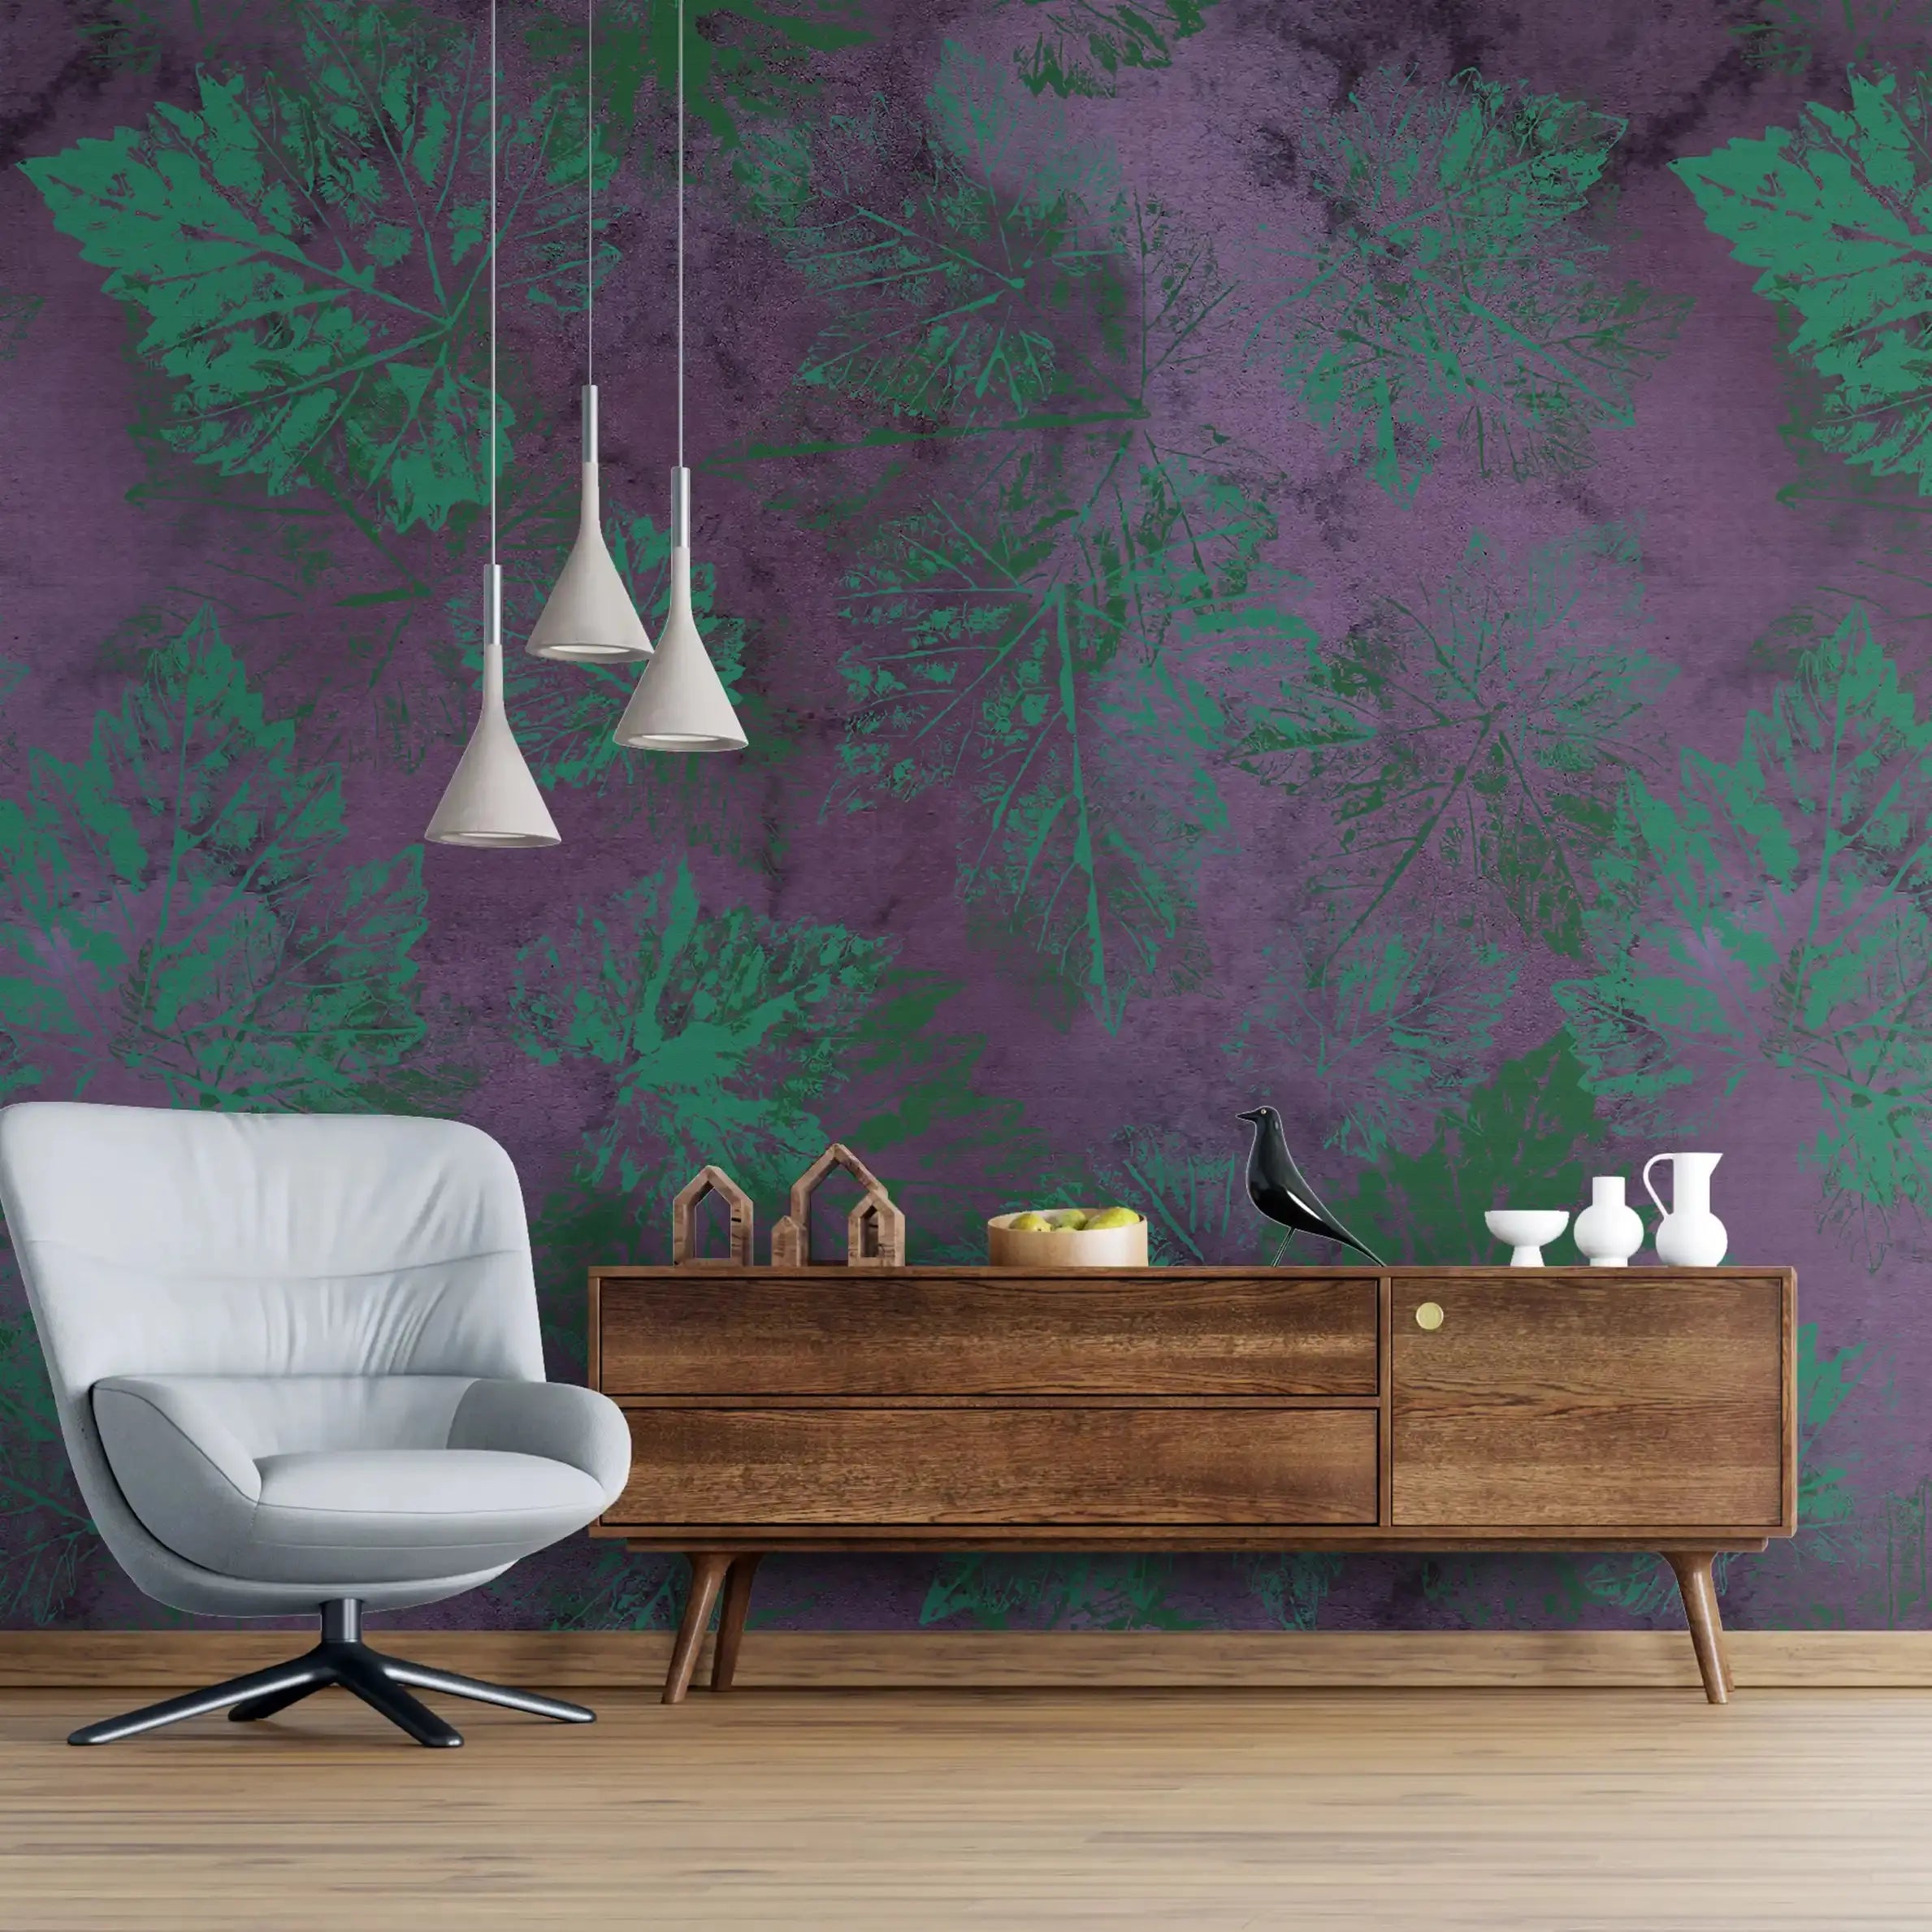 3072-C / Vintage Floral Mural Peel and Stick Wallpaper - Green  Nature-Inspired Wall Decor for Modern Homes - Artevella